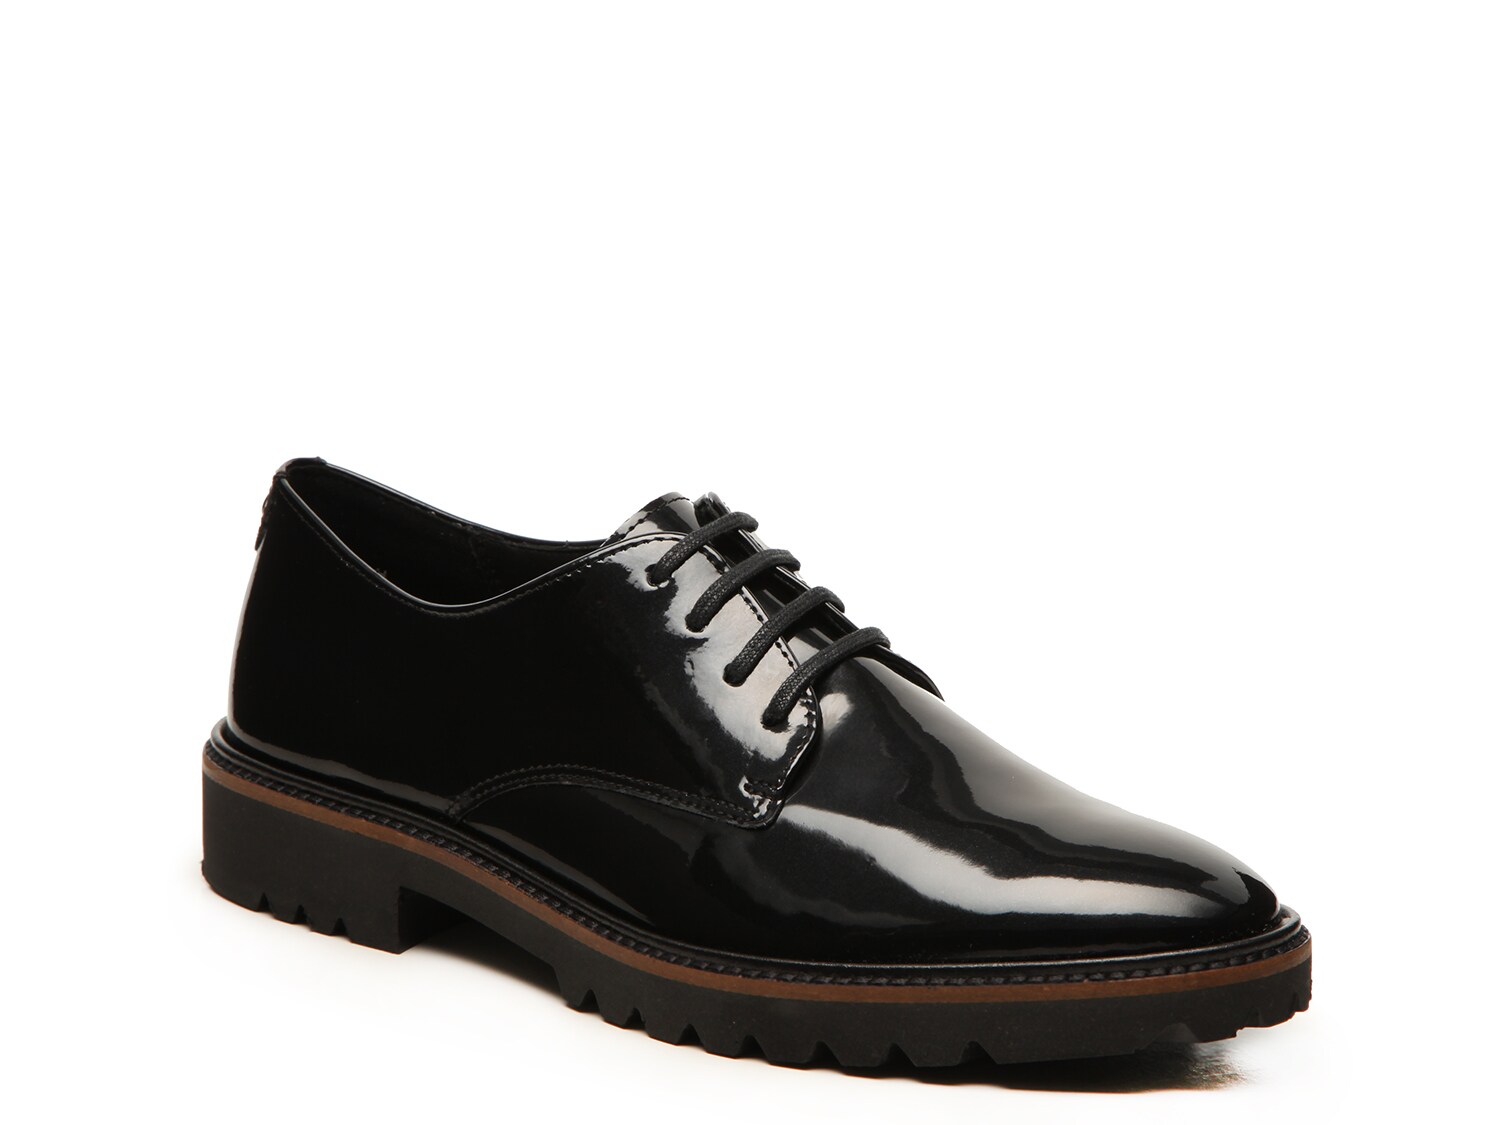 ECCO Incise Oxford - Free Shipping | DSW